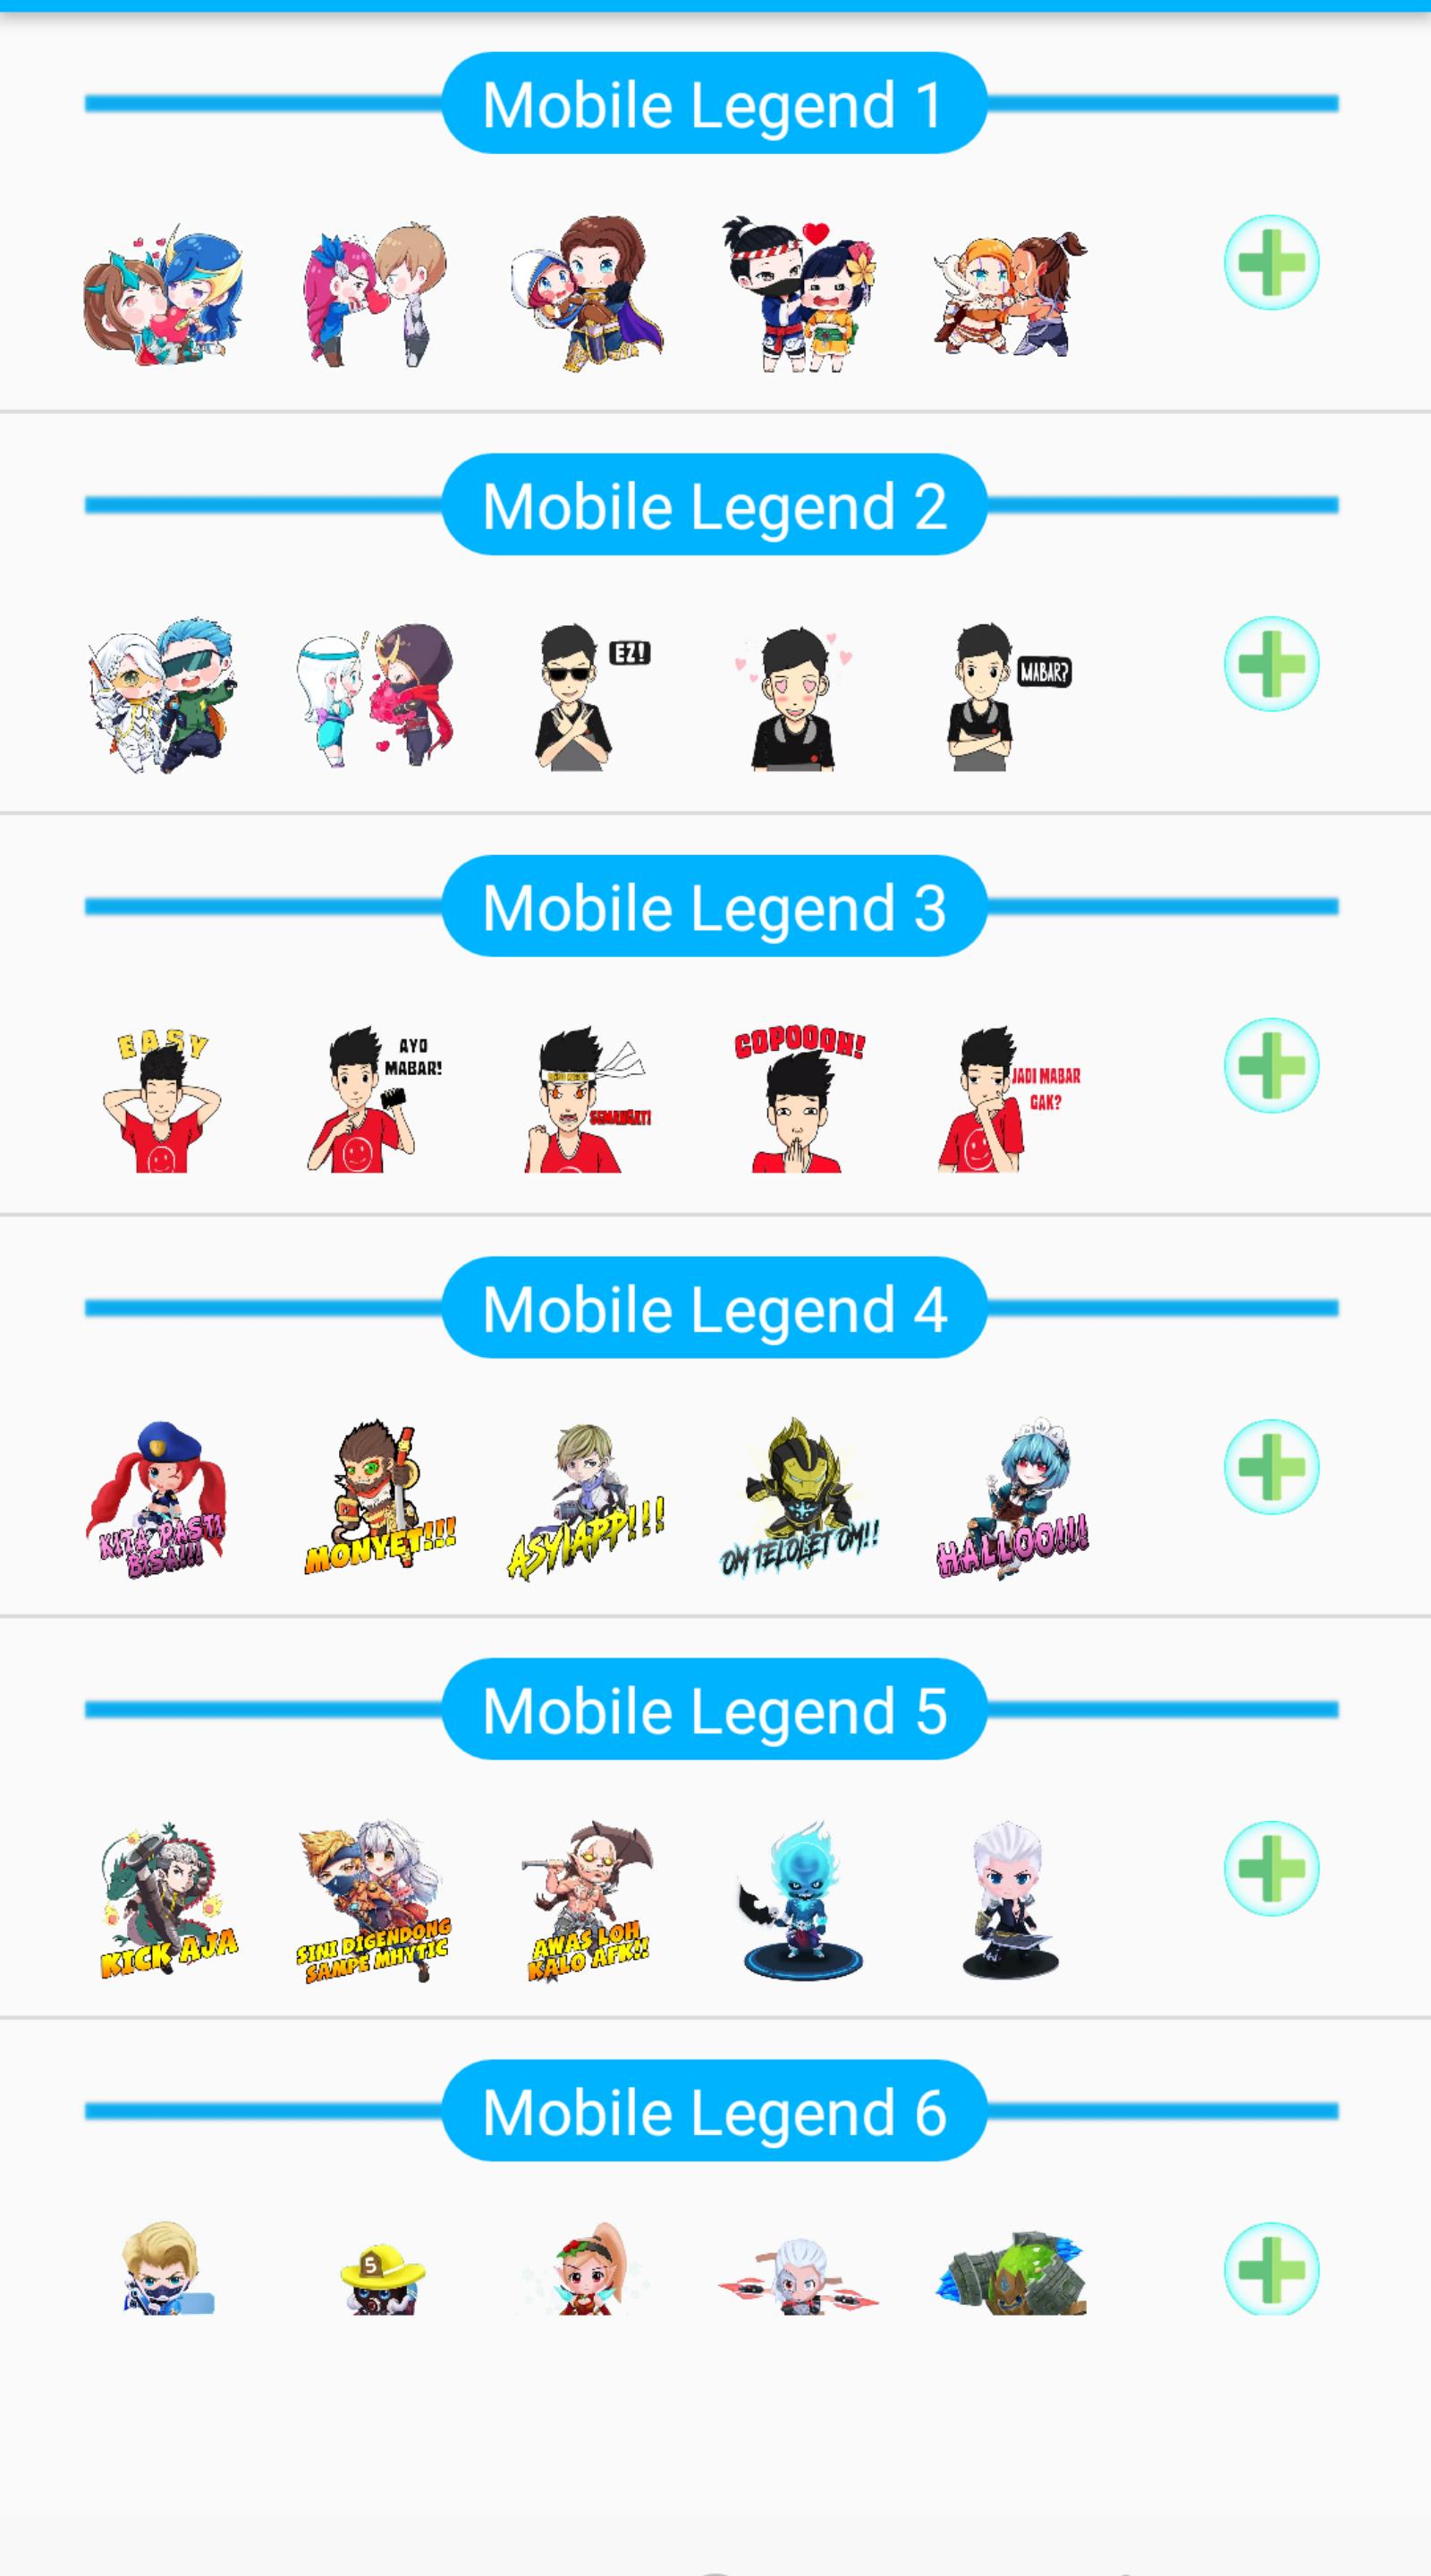 Sticker Wa MLB Lucu For Android APK Download